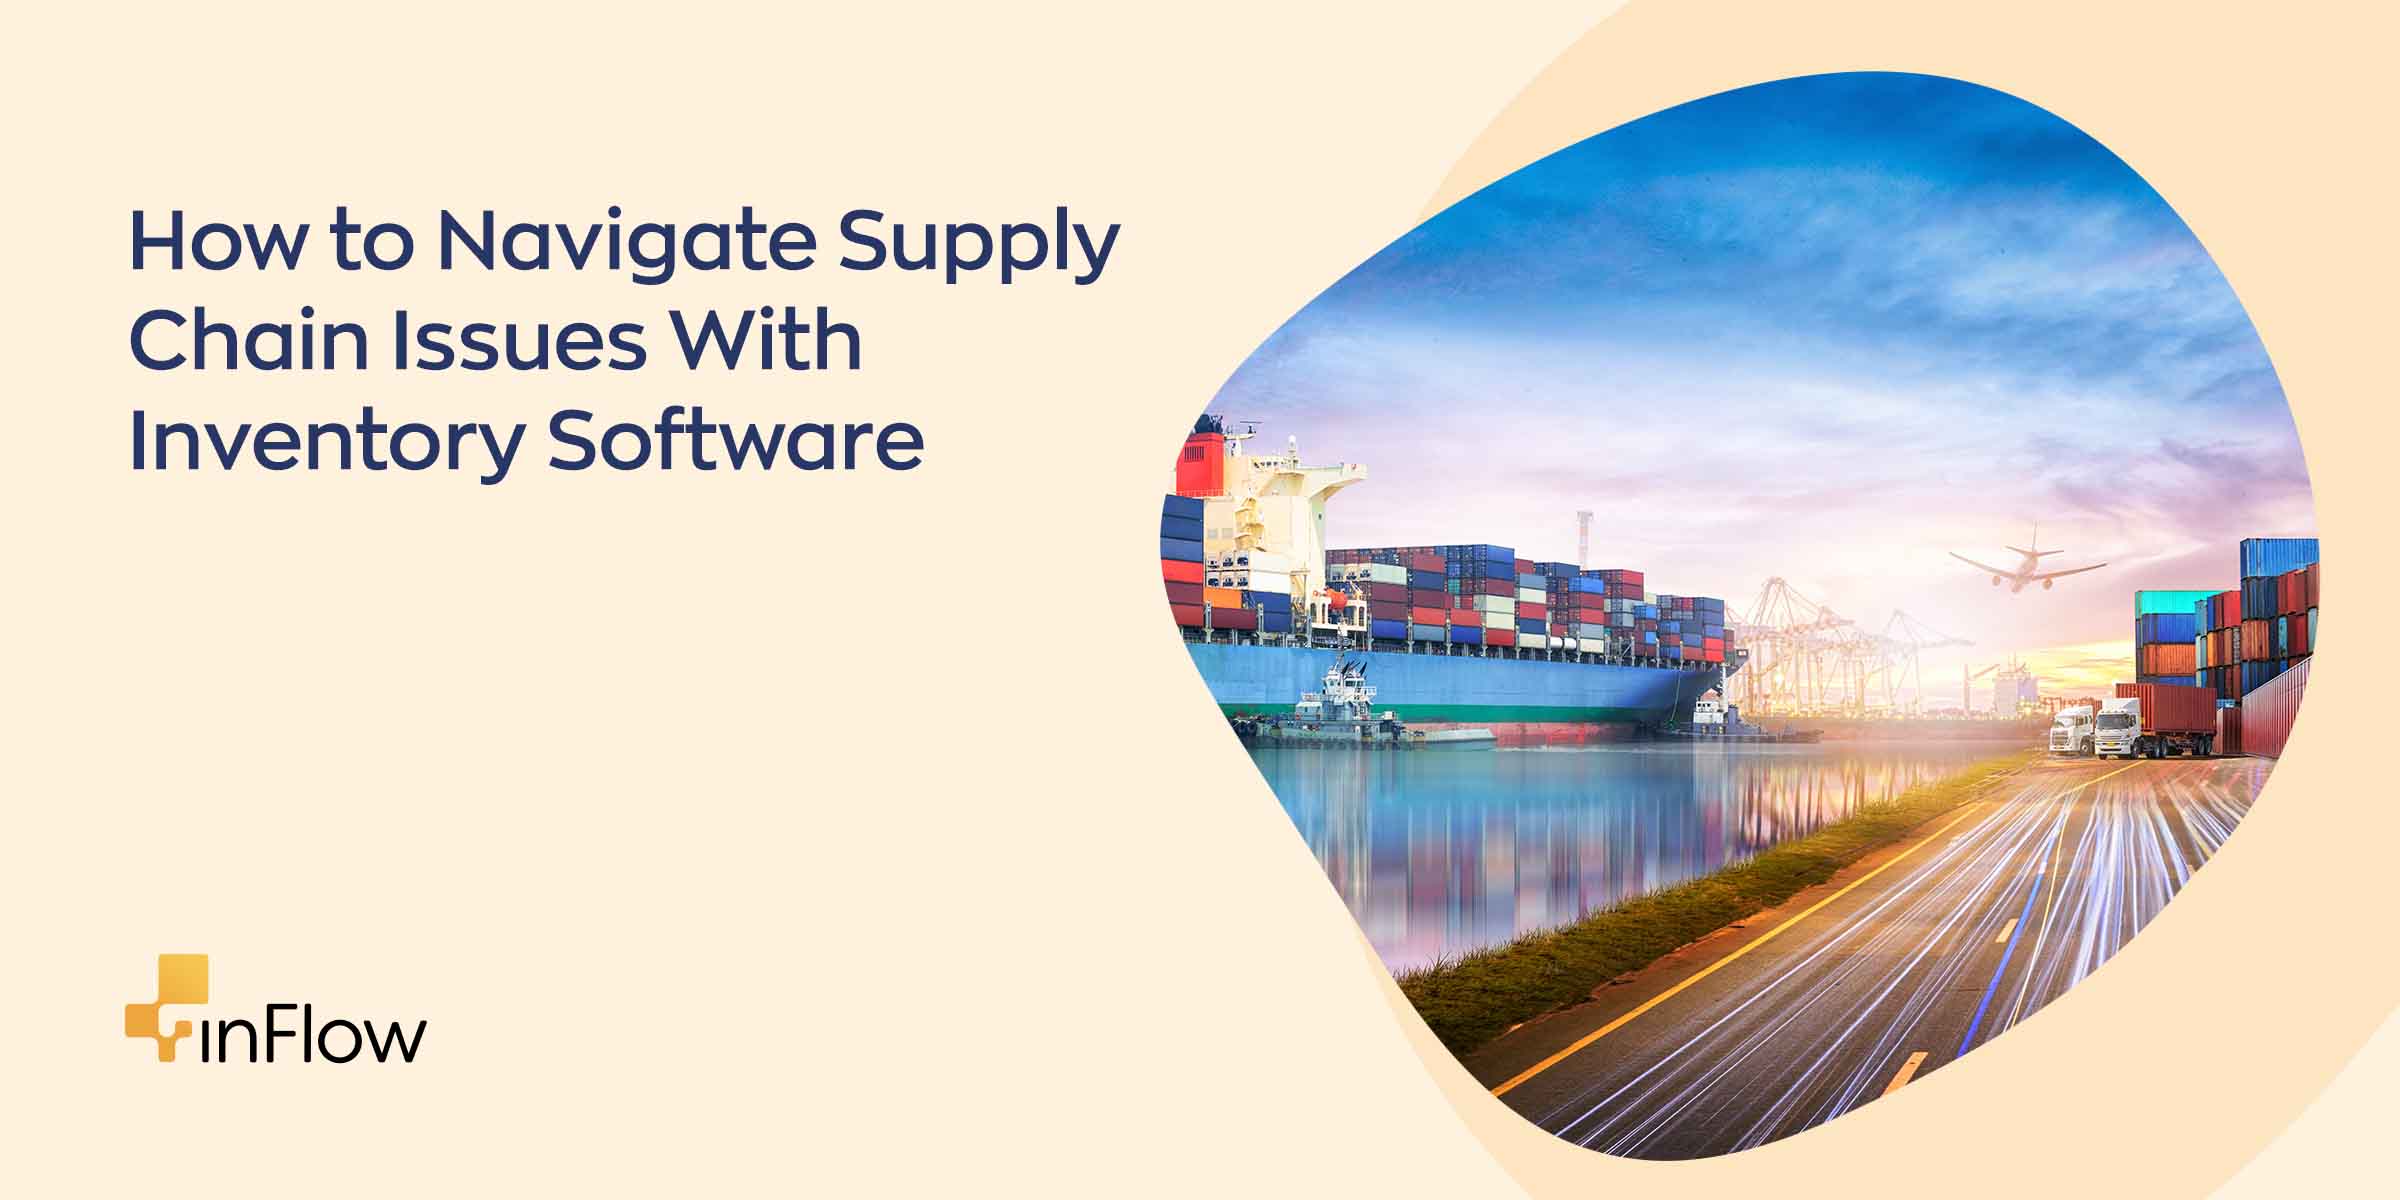 How to Navigate Supply Chain Issues With Inventory Software